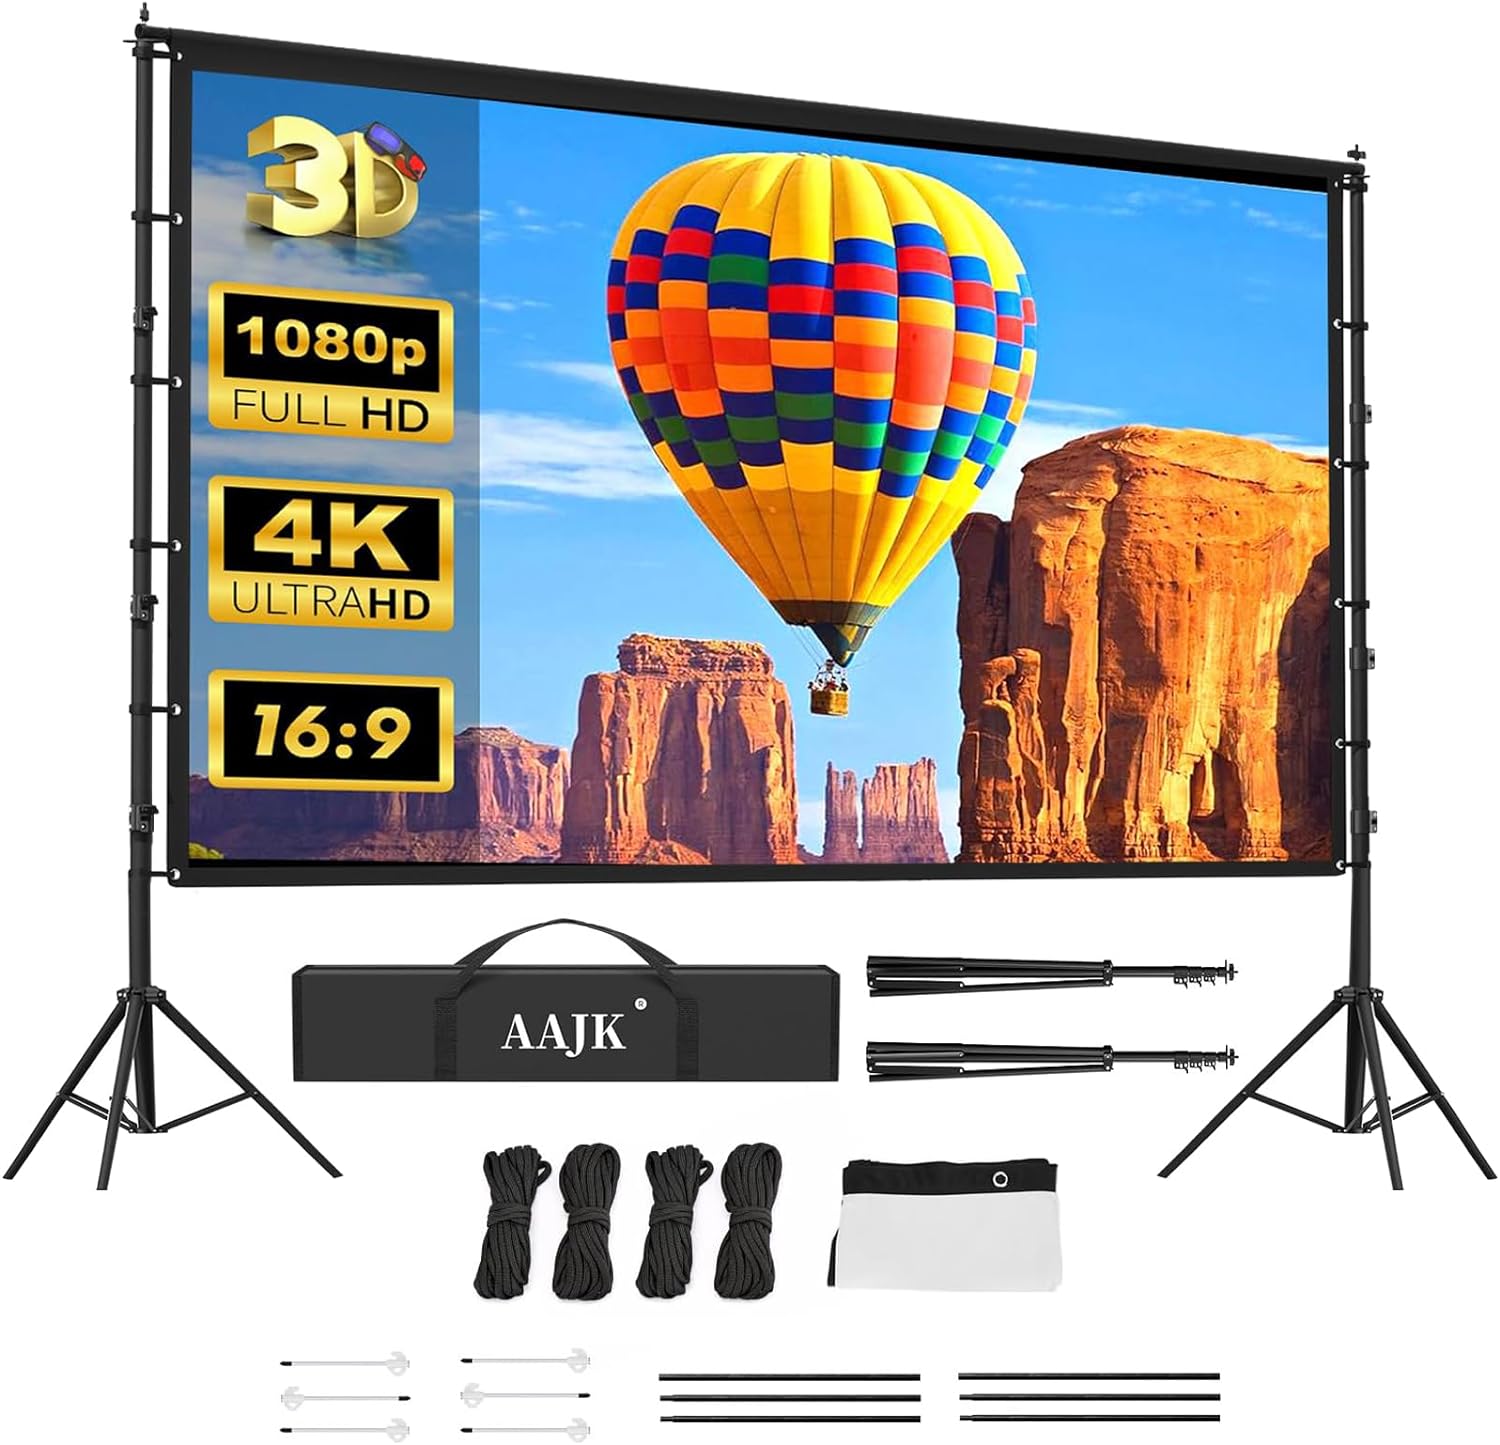 AAJK 150in Projector Screen and Stand,Portable 16:9 4K HD Indoor Outdoor Projection Screen with Wrinkle-Free Design, Ideal for Home Theater and Backyard Cinema  Includes Carry Bag